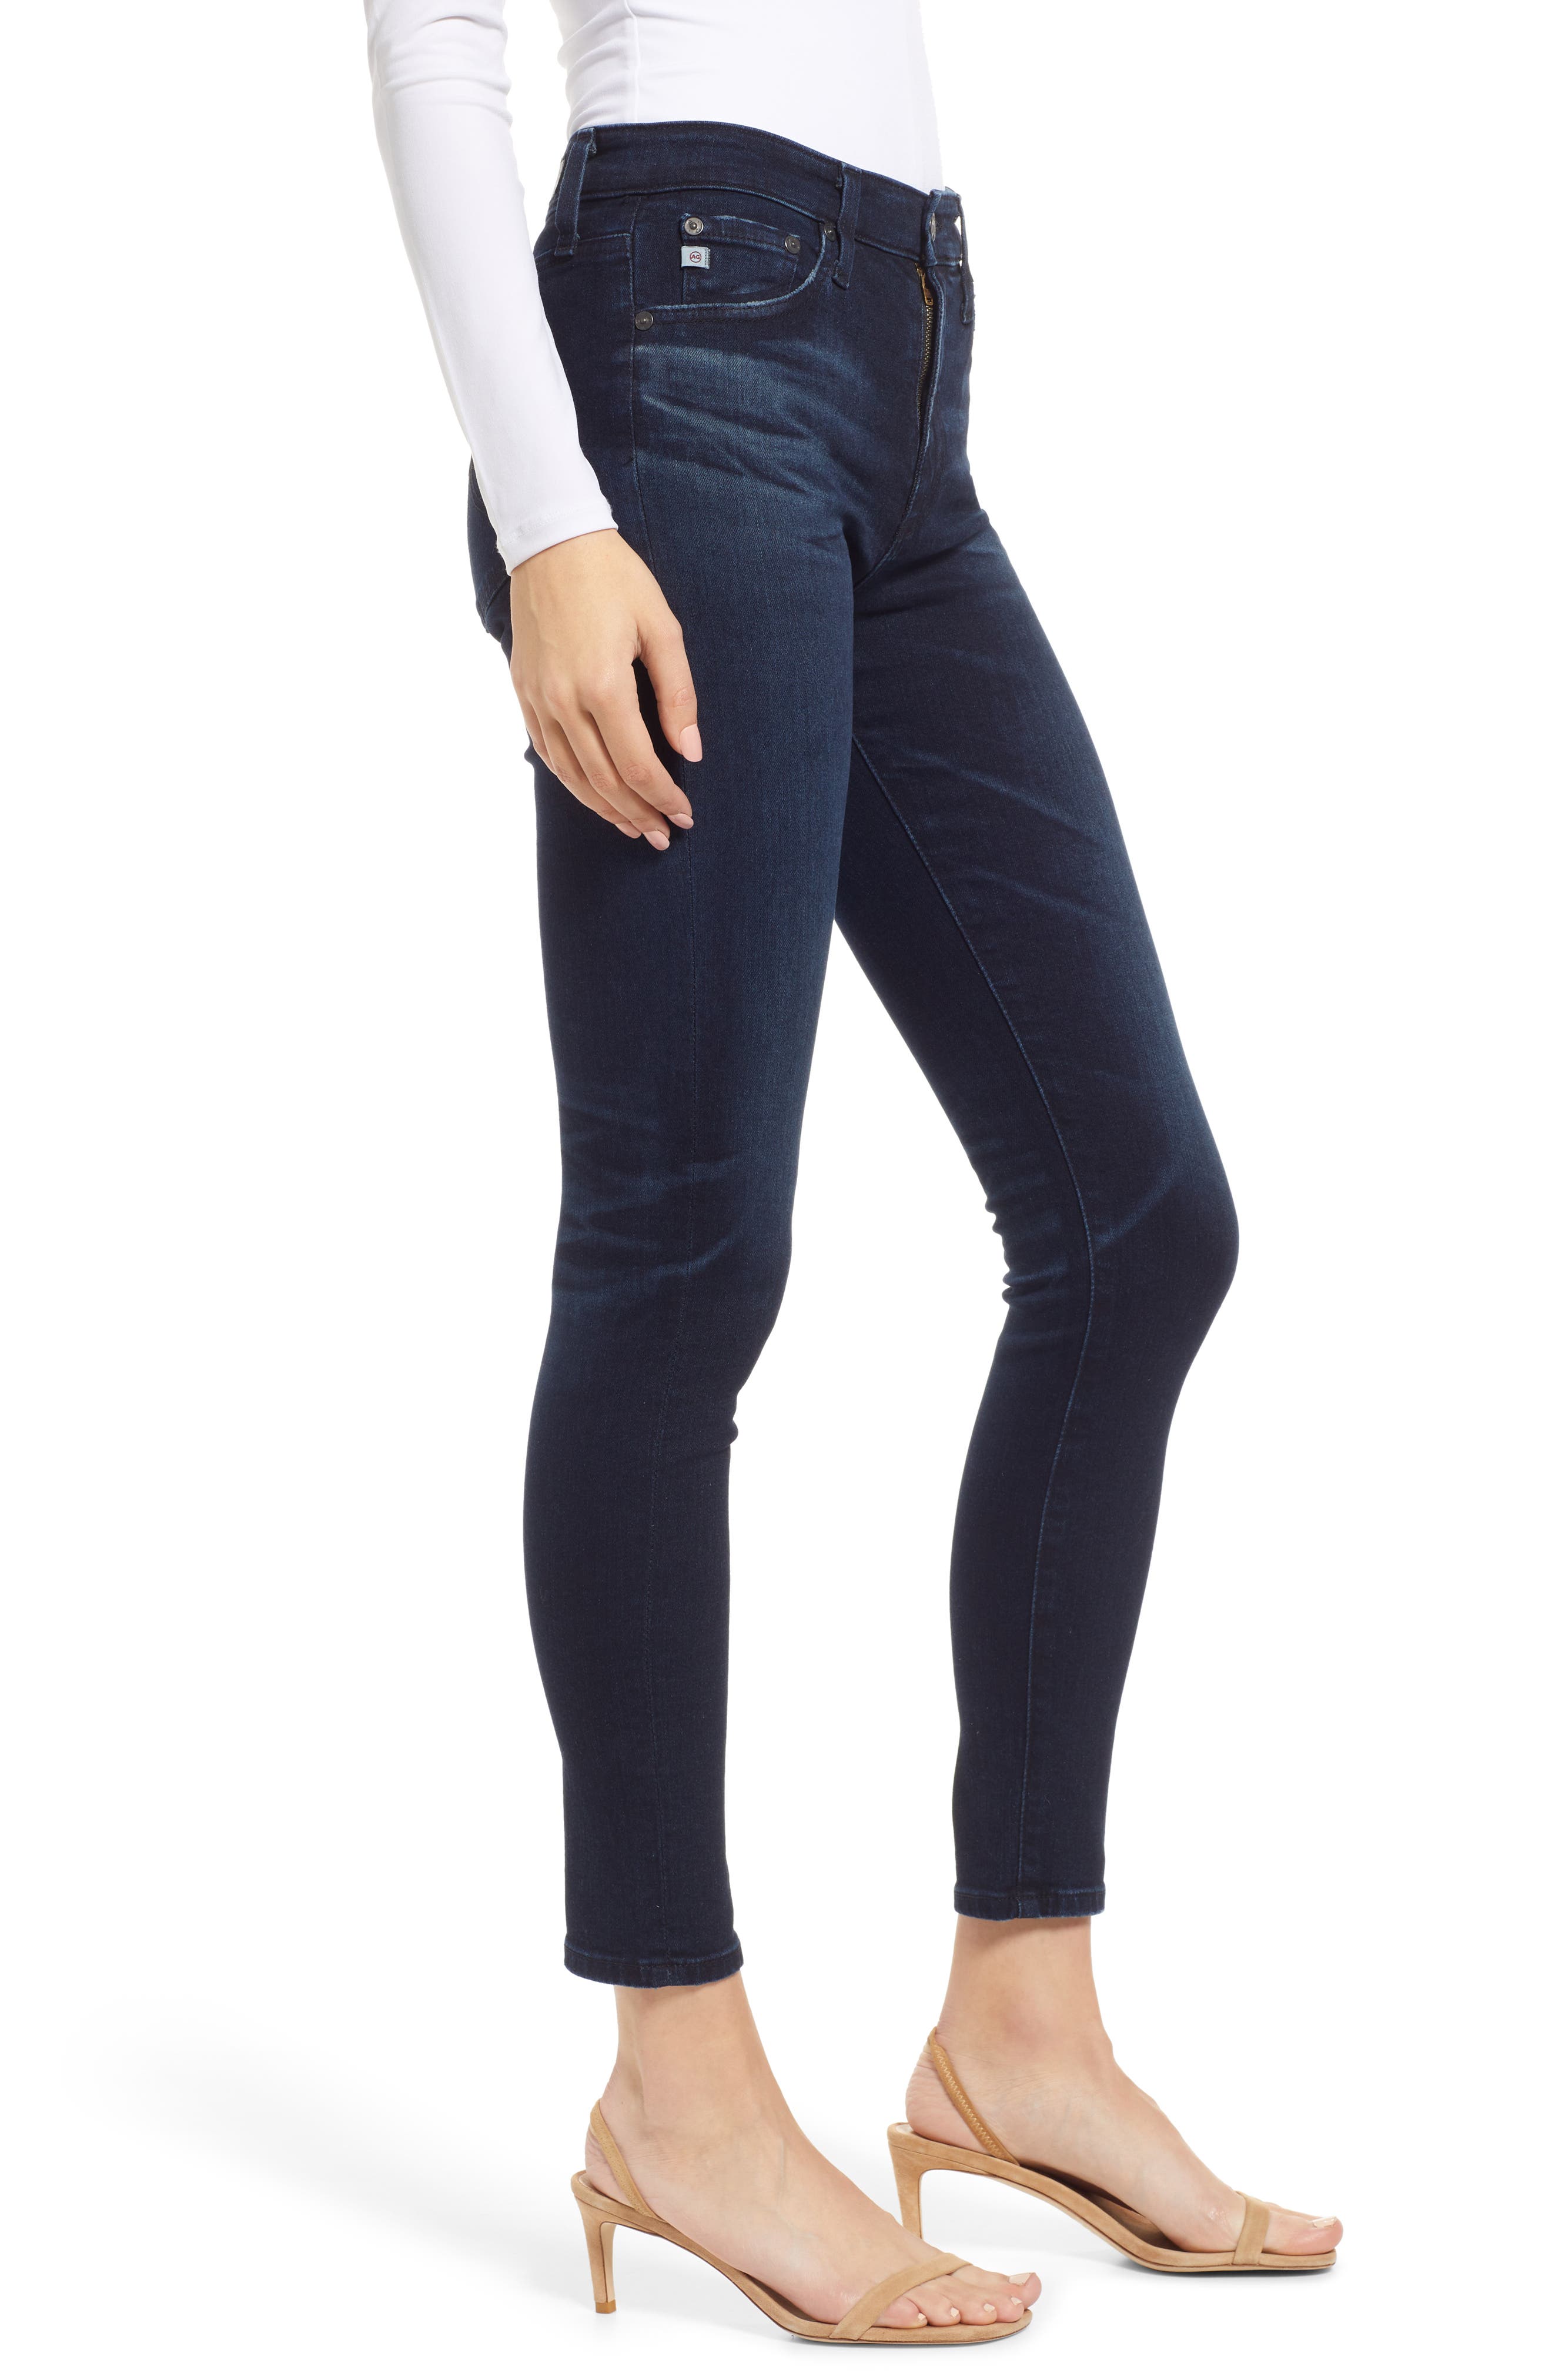 Adriano Goldschmied Womens Farrah Destroyed Ankle Skinny Crop Jeans BHFO 9414 